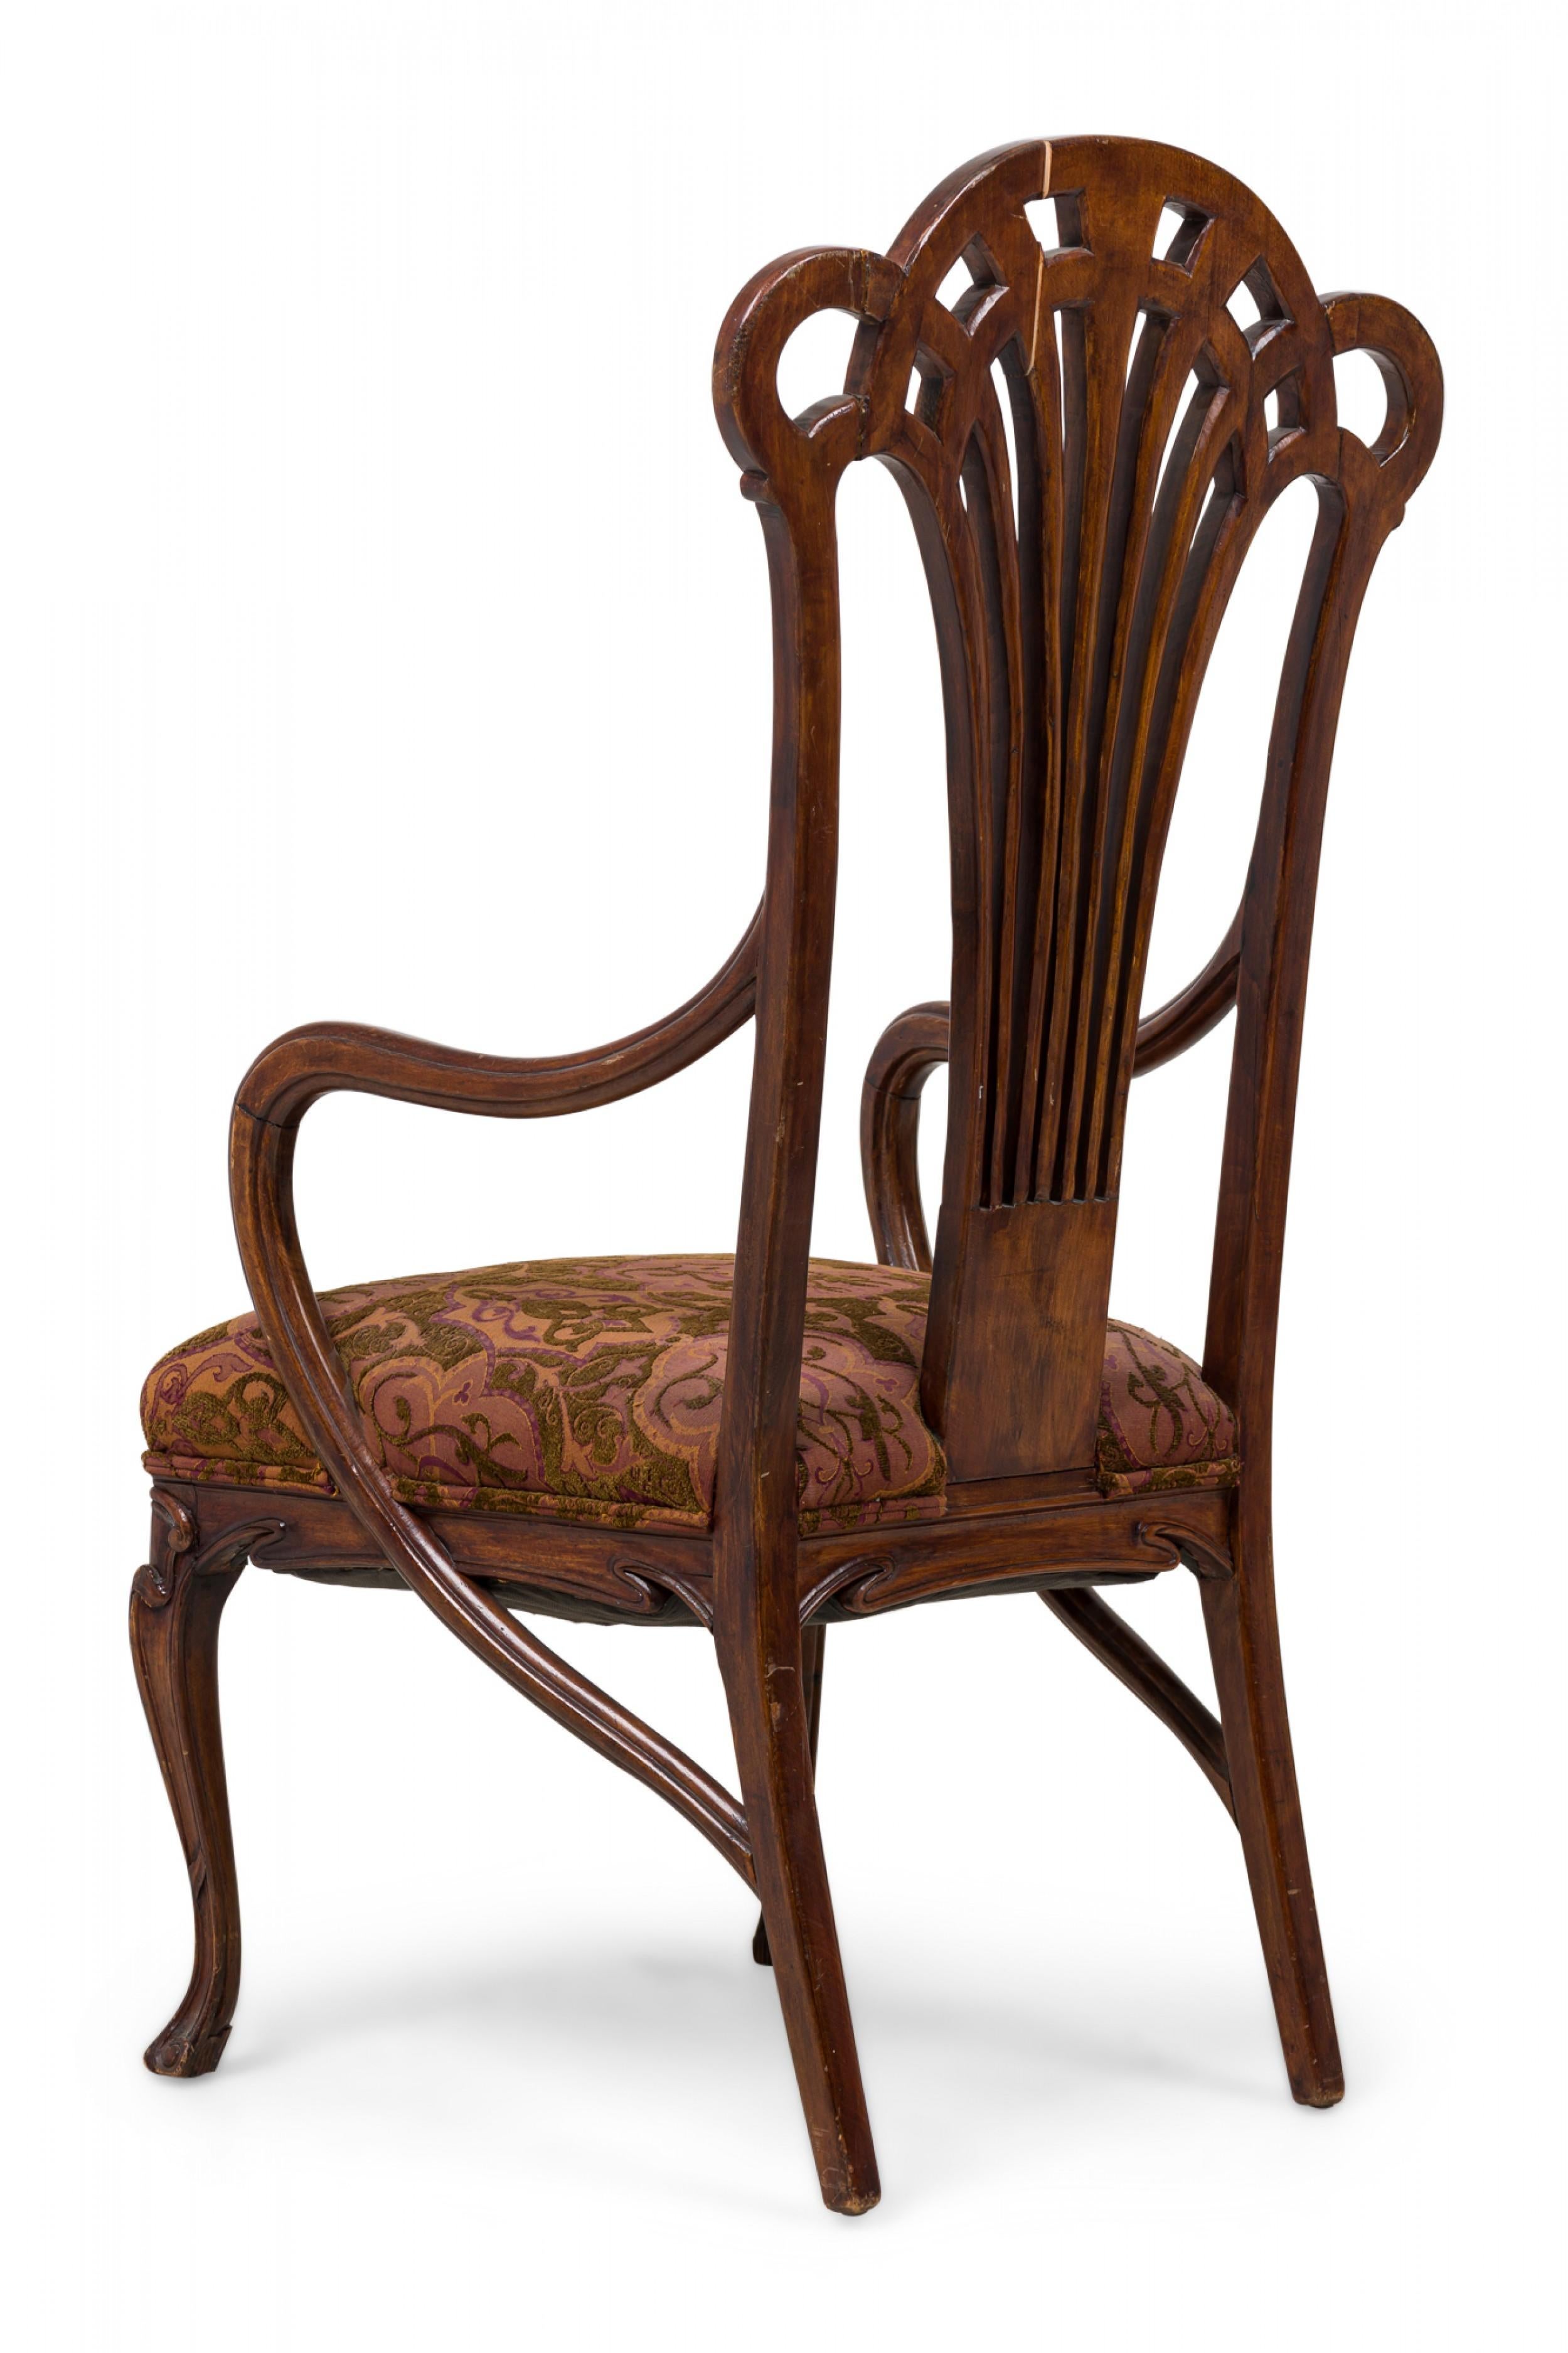 Fabric Eugene Gaillard Art Nouveau French Mahogany Upholstered Armchair For Sale